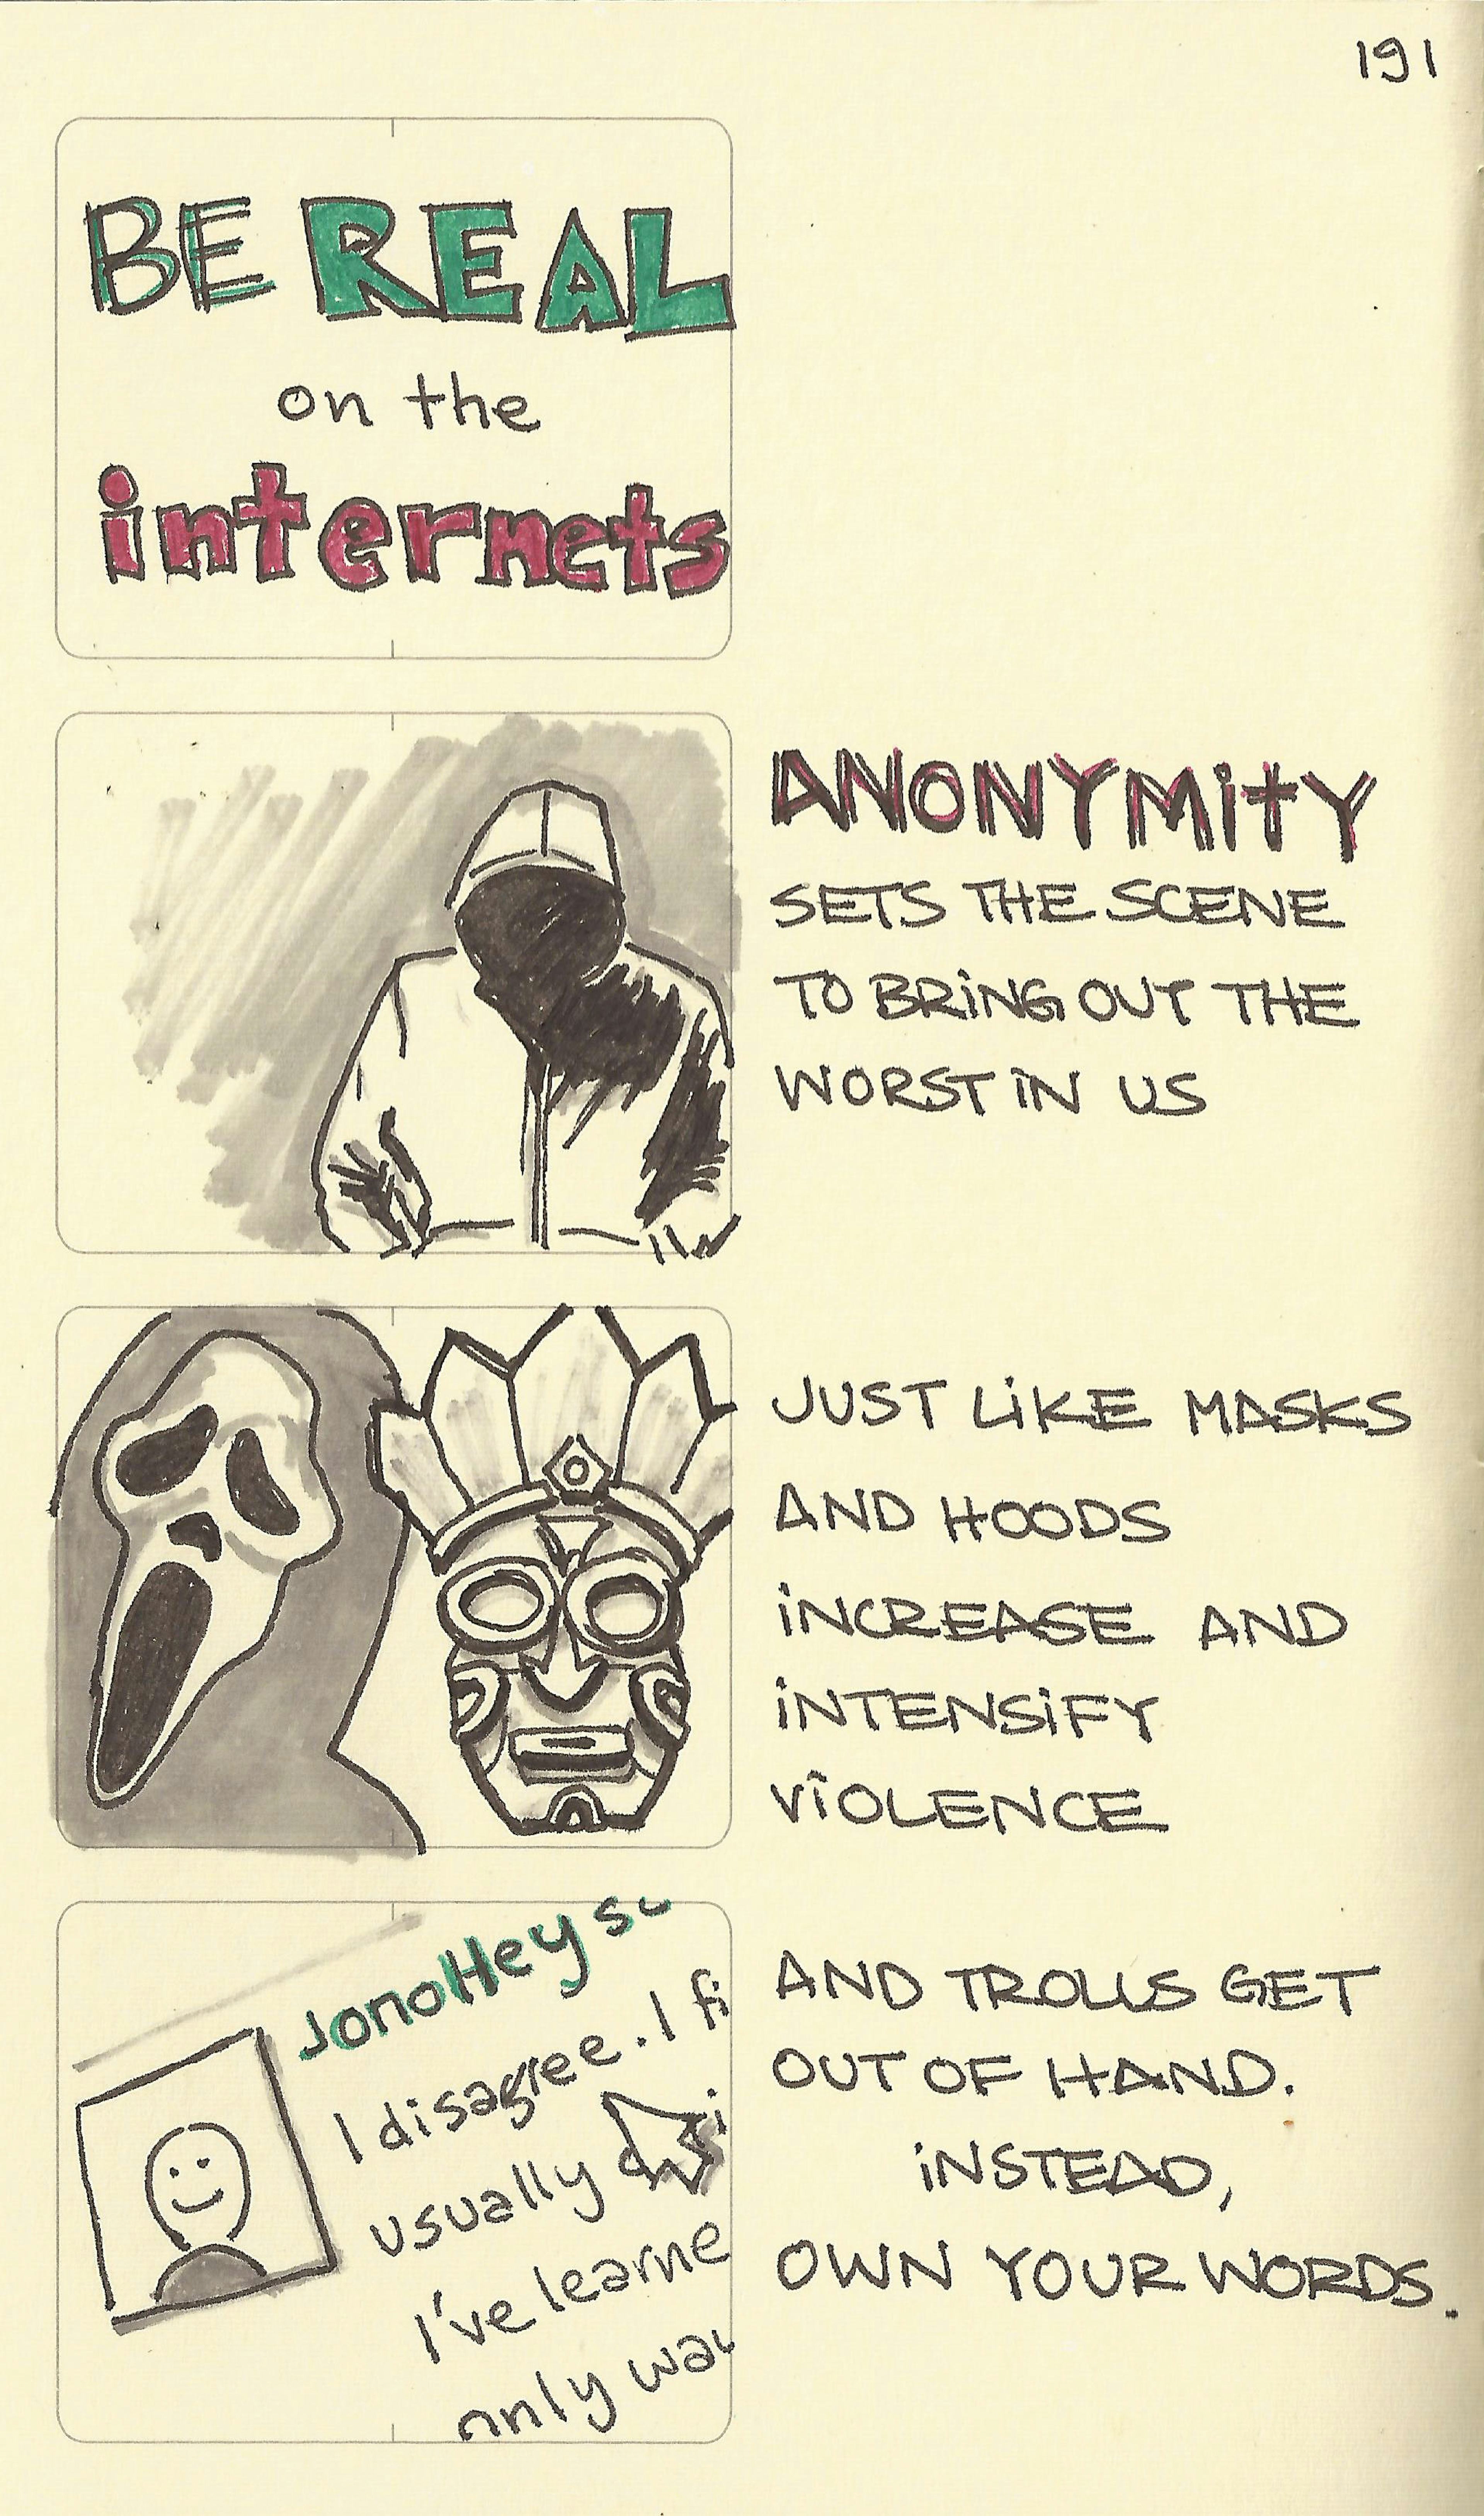 Be real on the internets - Sketchplanations